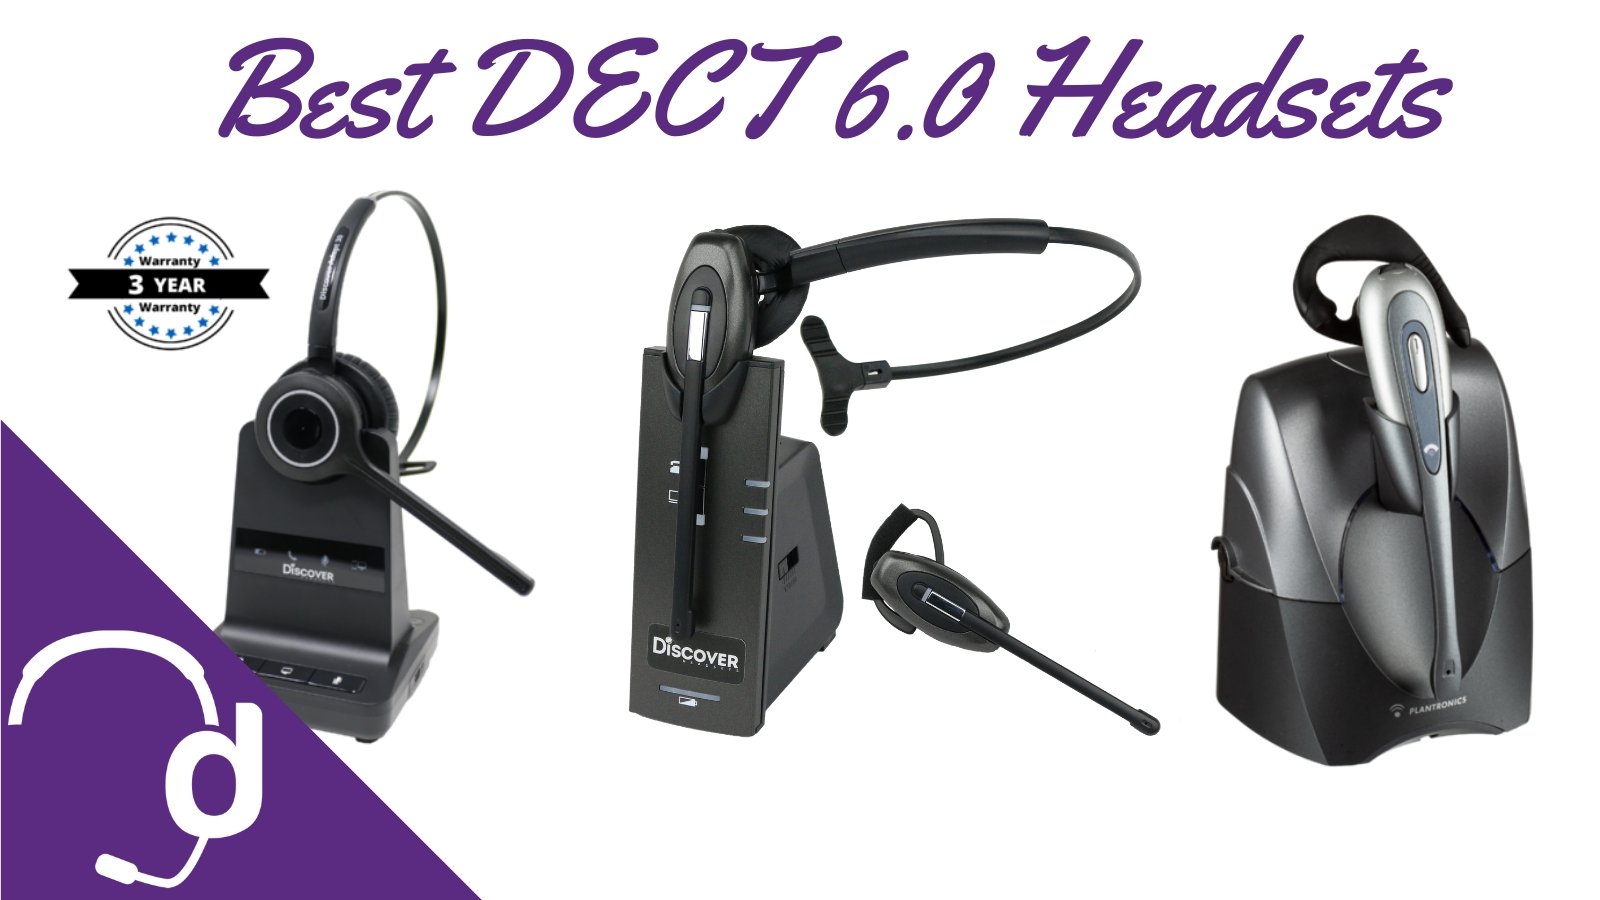 Top 3 DECT 6.0 Wireless Headsets For Your Office Phone - Headset Advisor